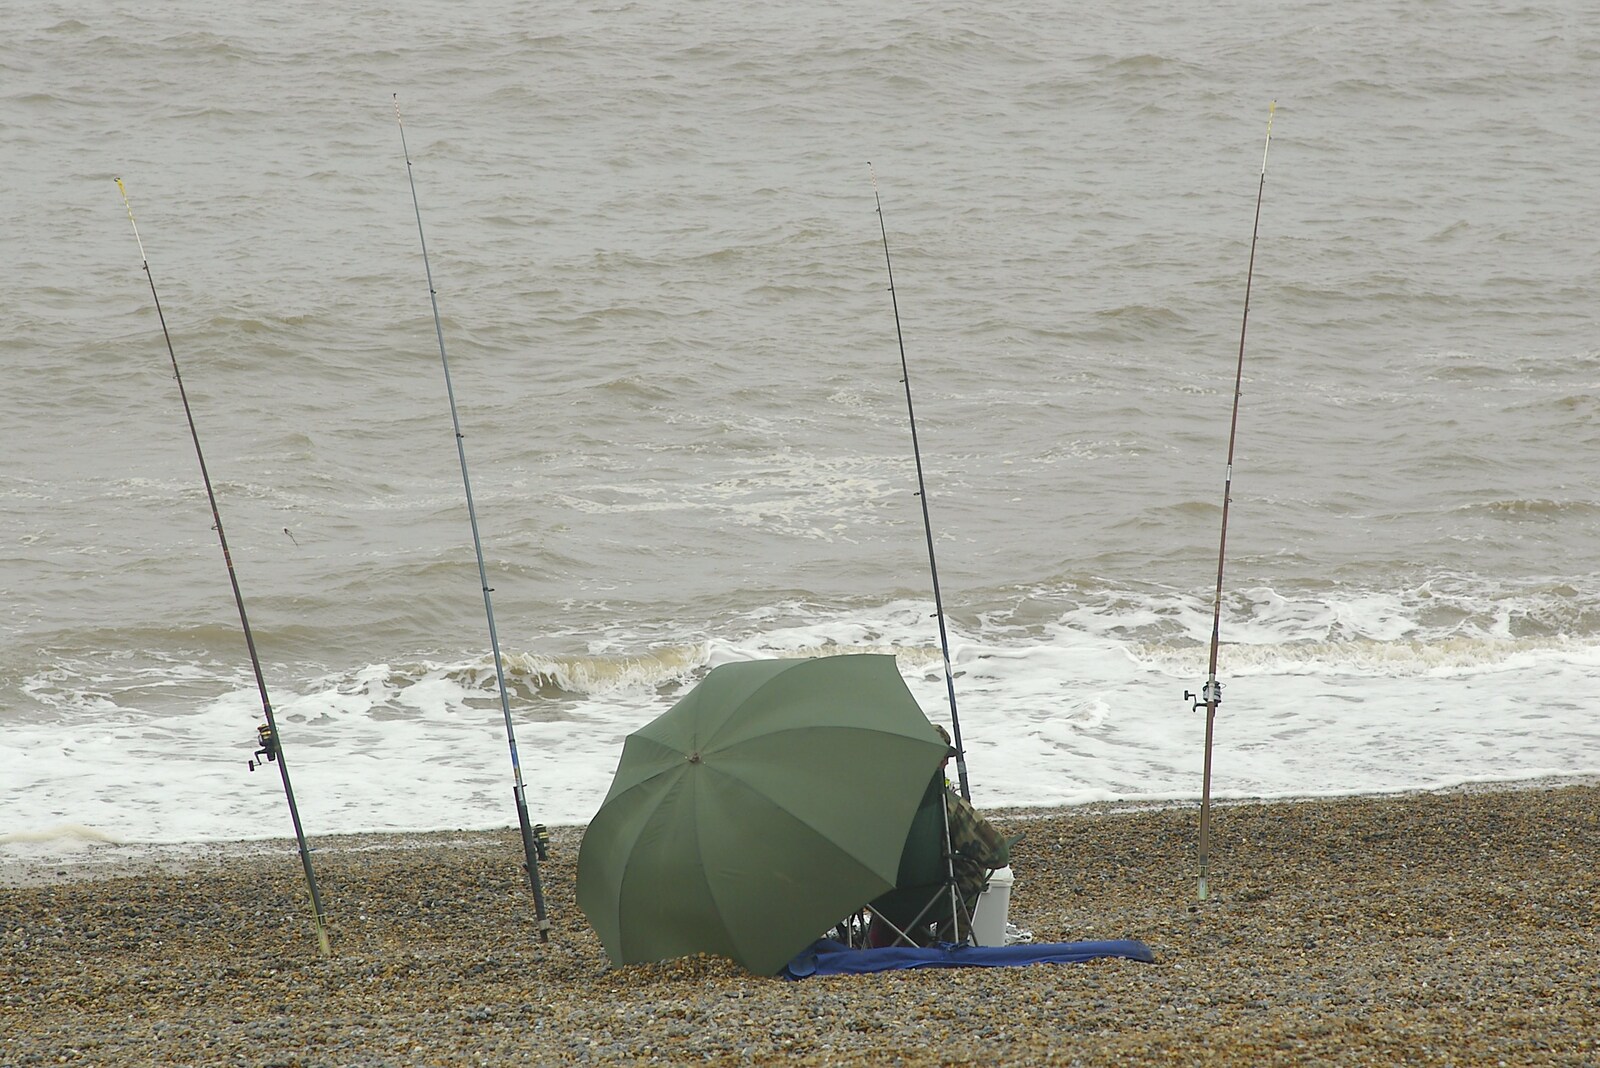 A fisherman faces the bleak North Sea from The BSCC does The Pheasant Hotel, Kelling, Norfolk - 6th May 2006